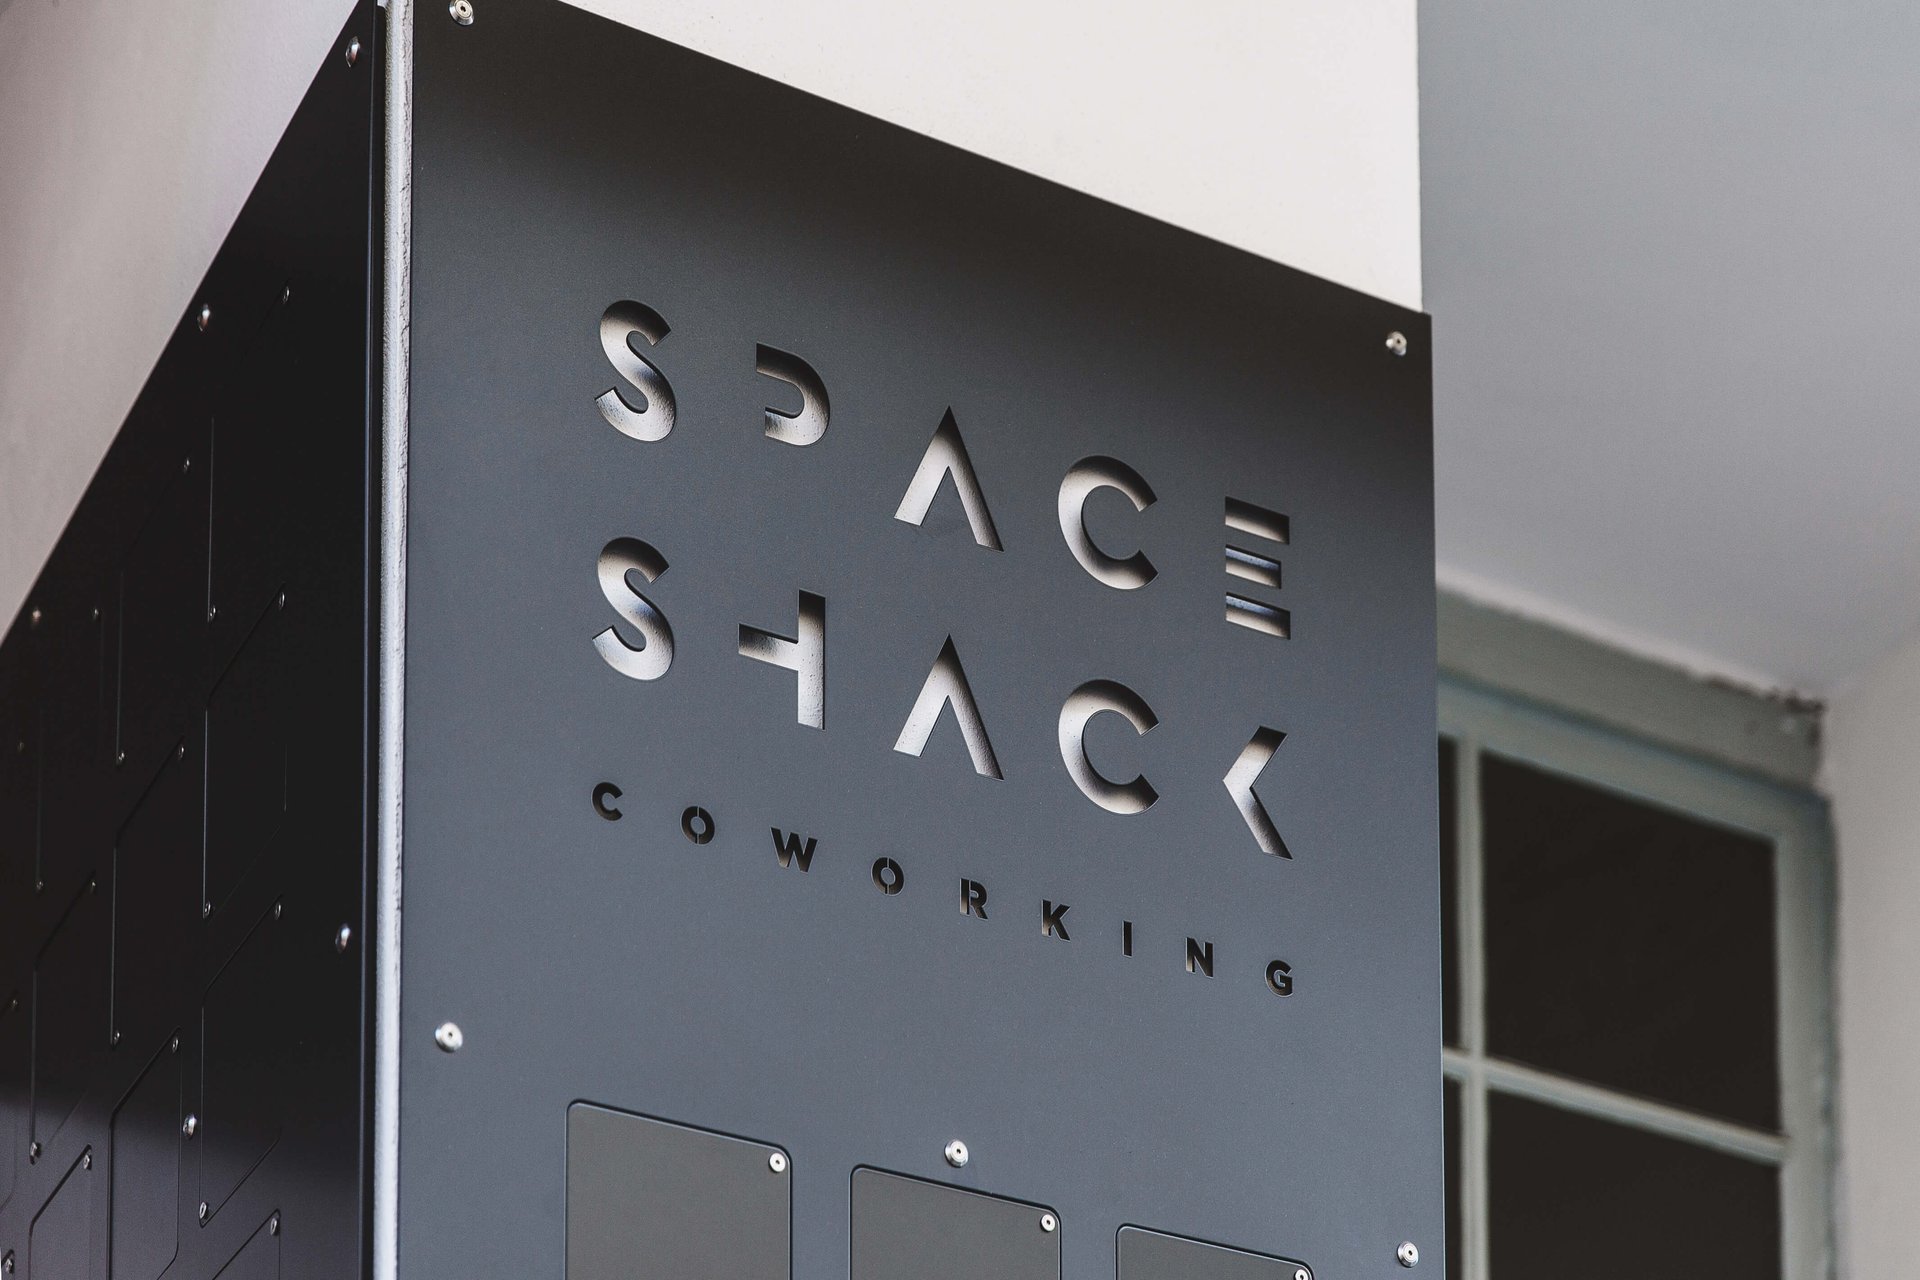 Exterior of Space Shack